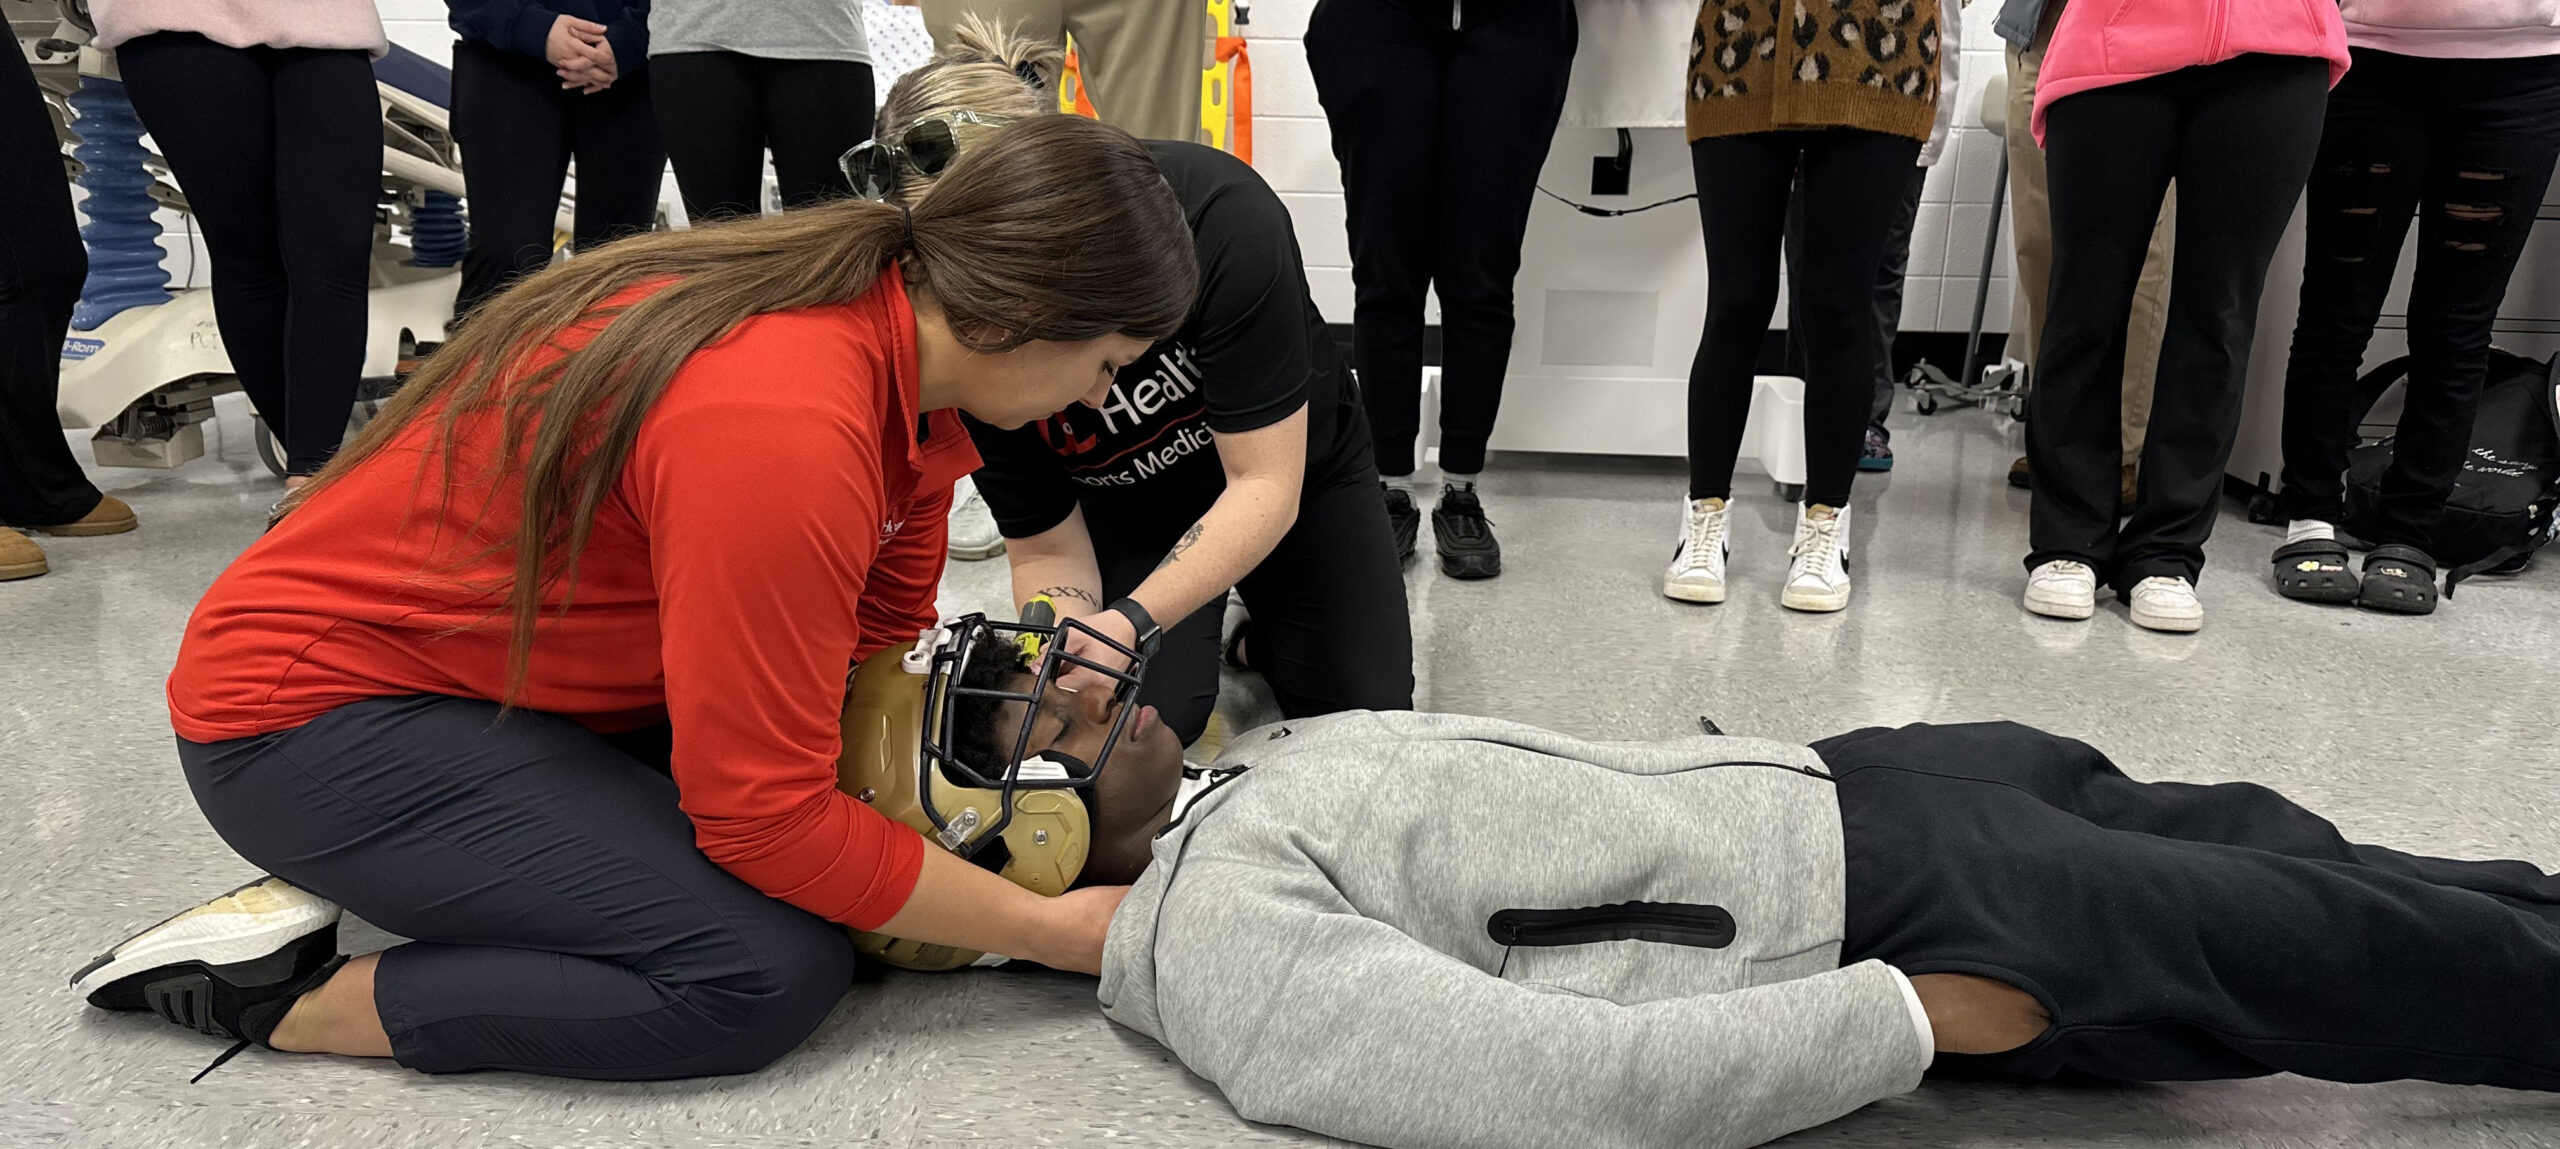 UofL Health – Sports Medicine team members demonstrate how to remove a helmet from an injured football player as students at Fairdale High School observe proper athletic training techniques